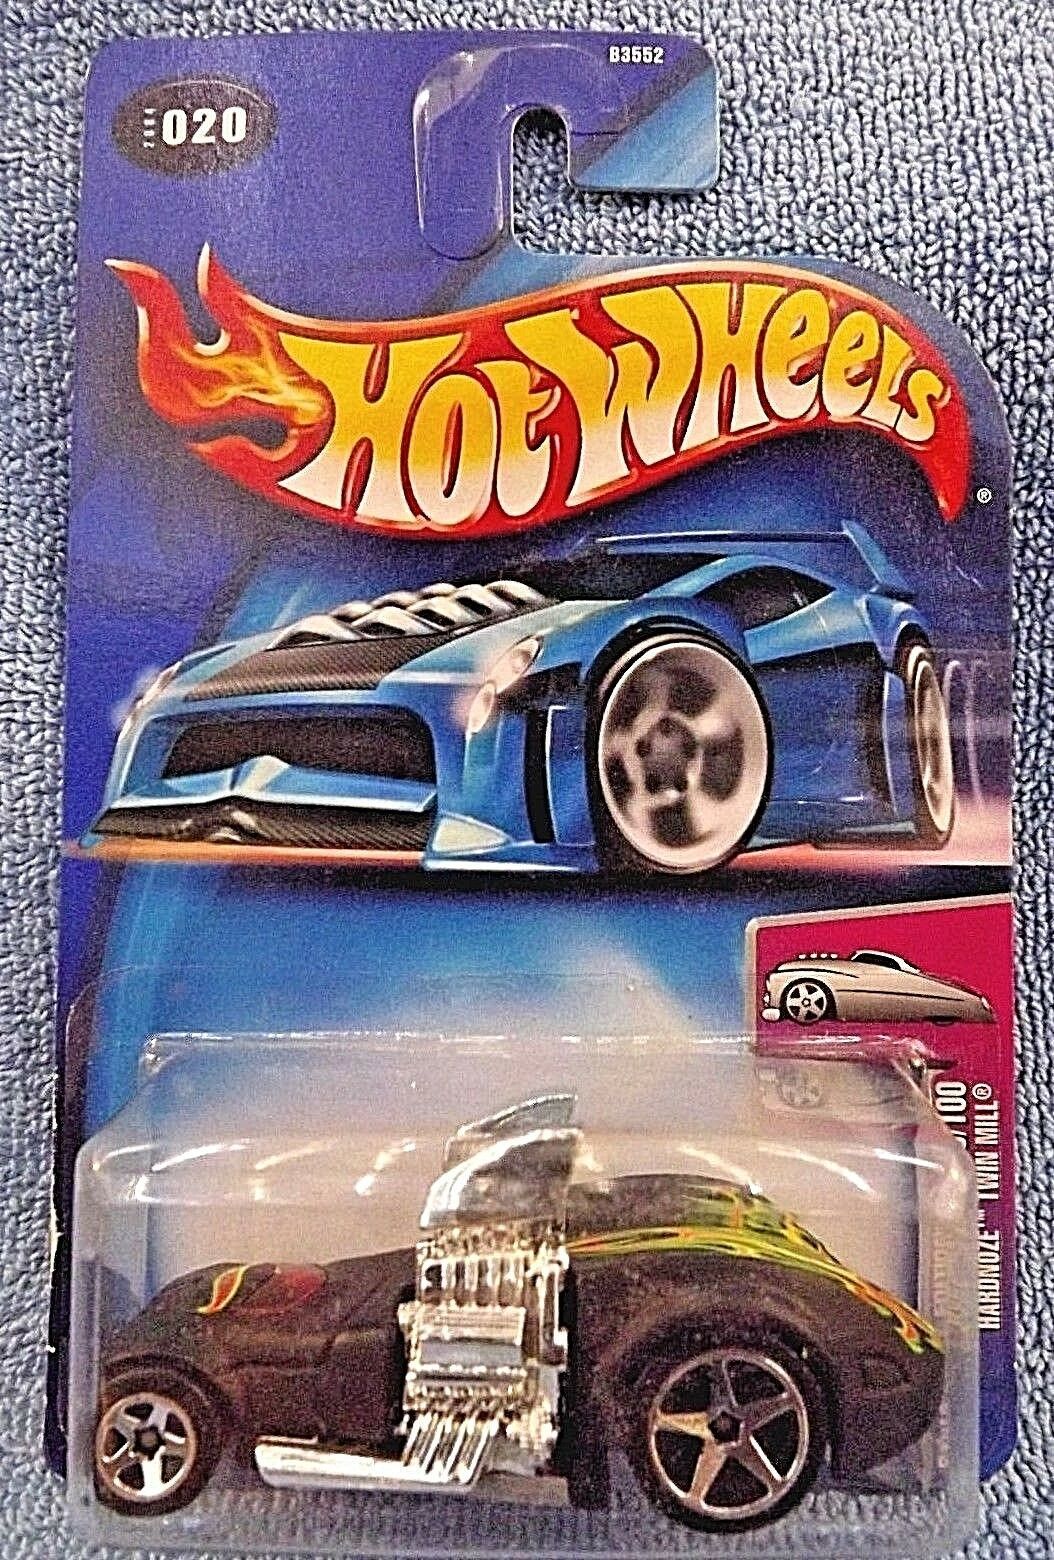 2004 Hot Wheels #20 First Editions 20/100 Hardnoze TWIN MILL Black w/Chrome 5Sp